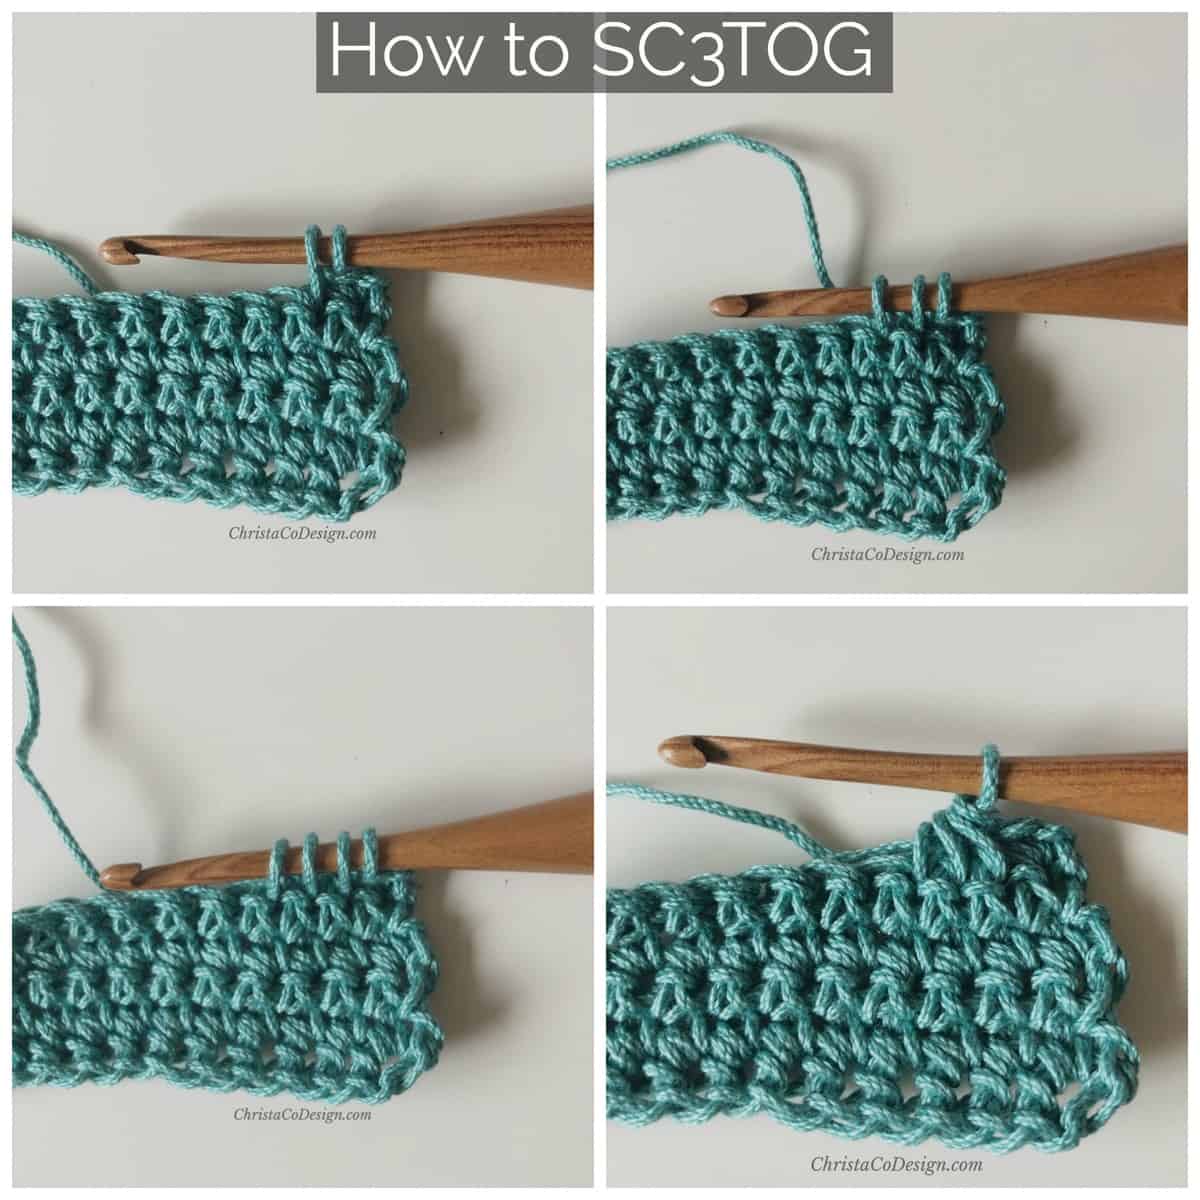 How to Single Crochet Three Together Sc3tog Tutorial - ChristaCoDesign